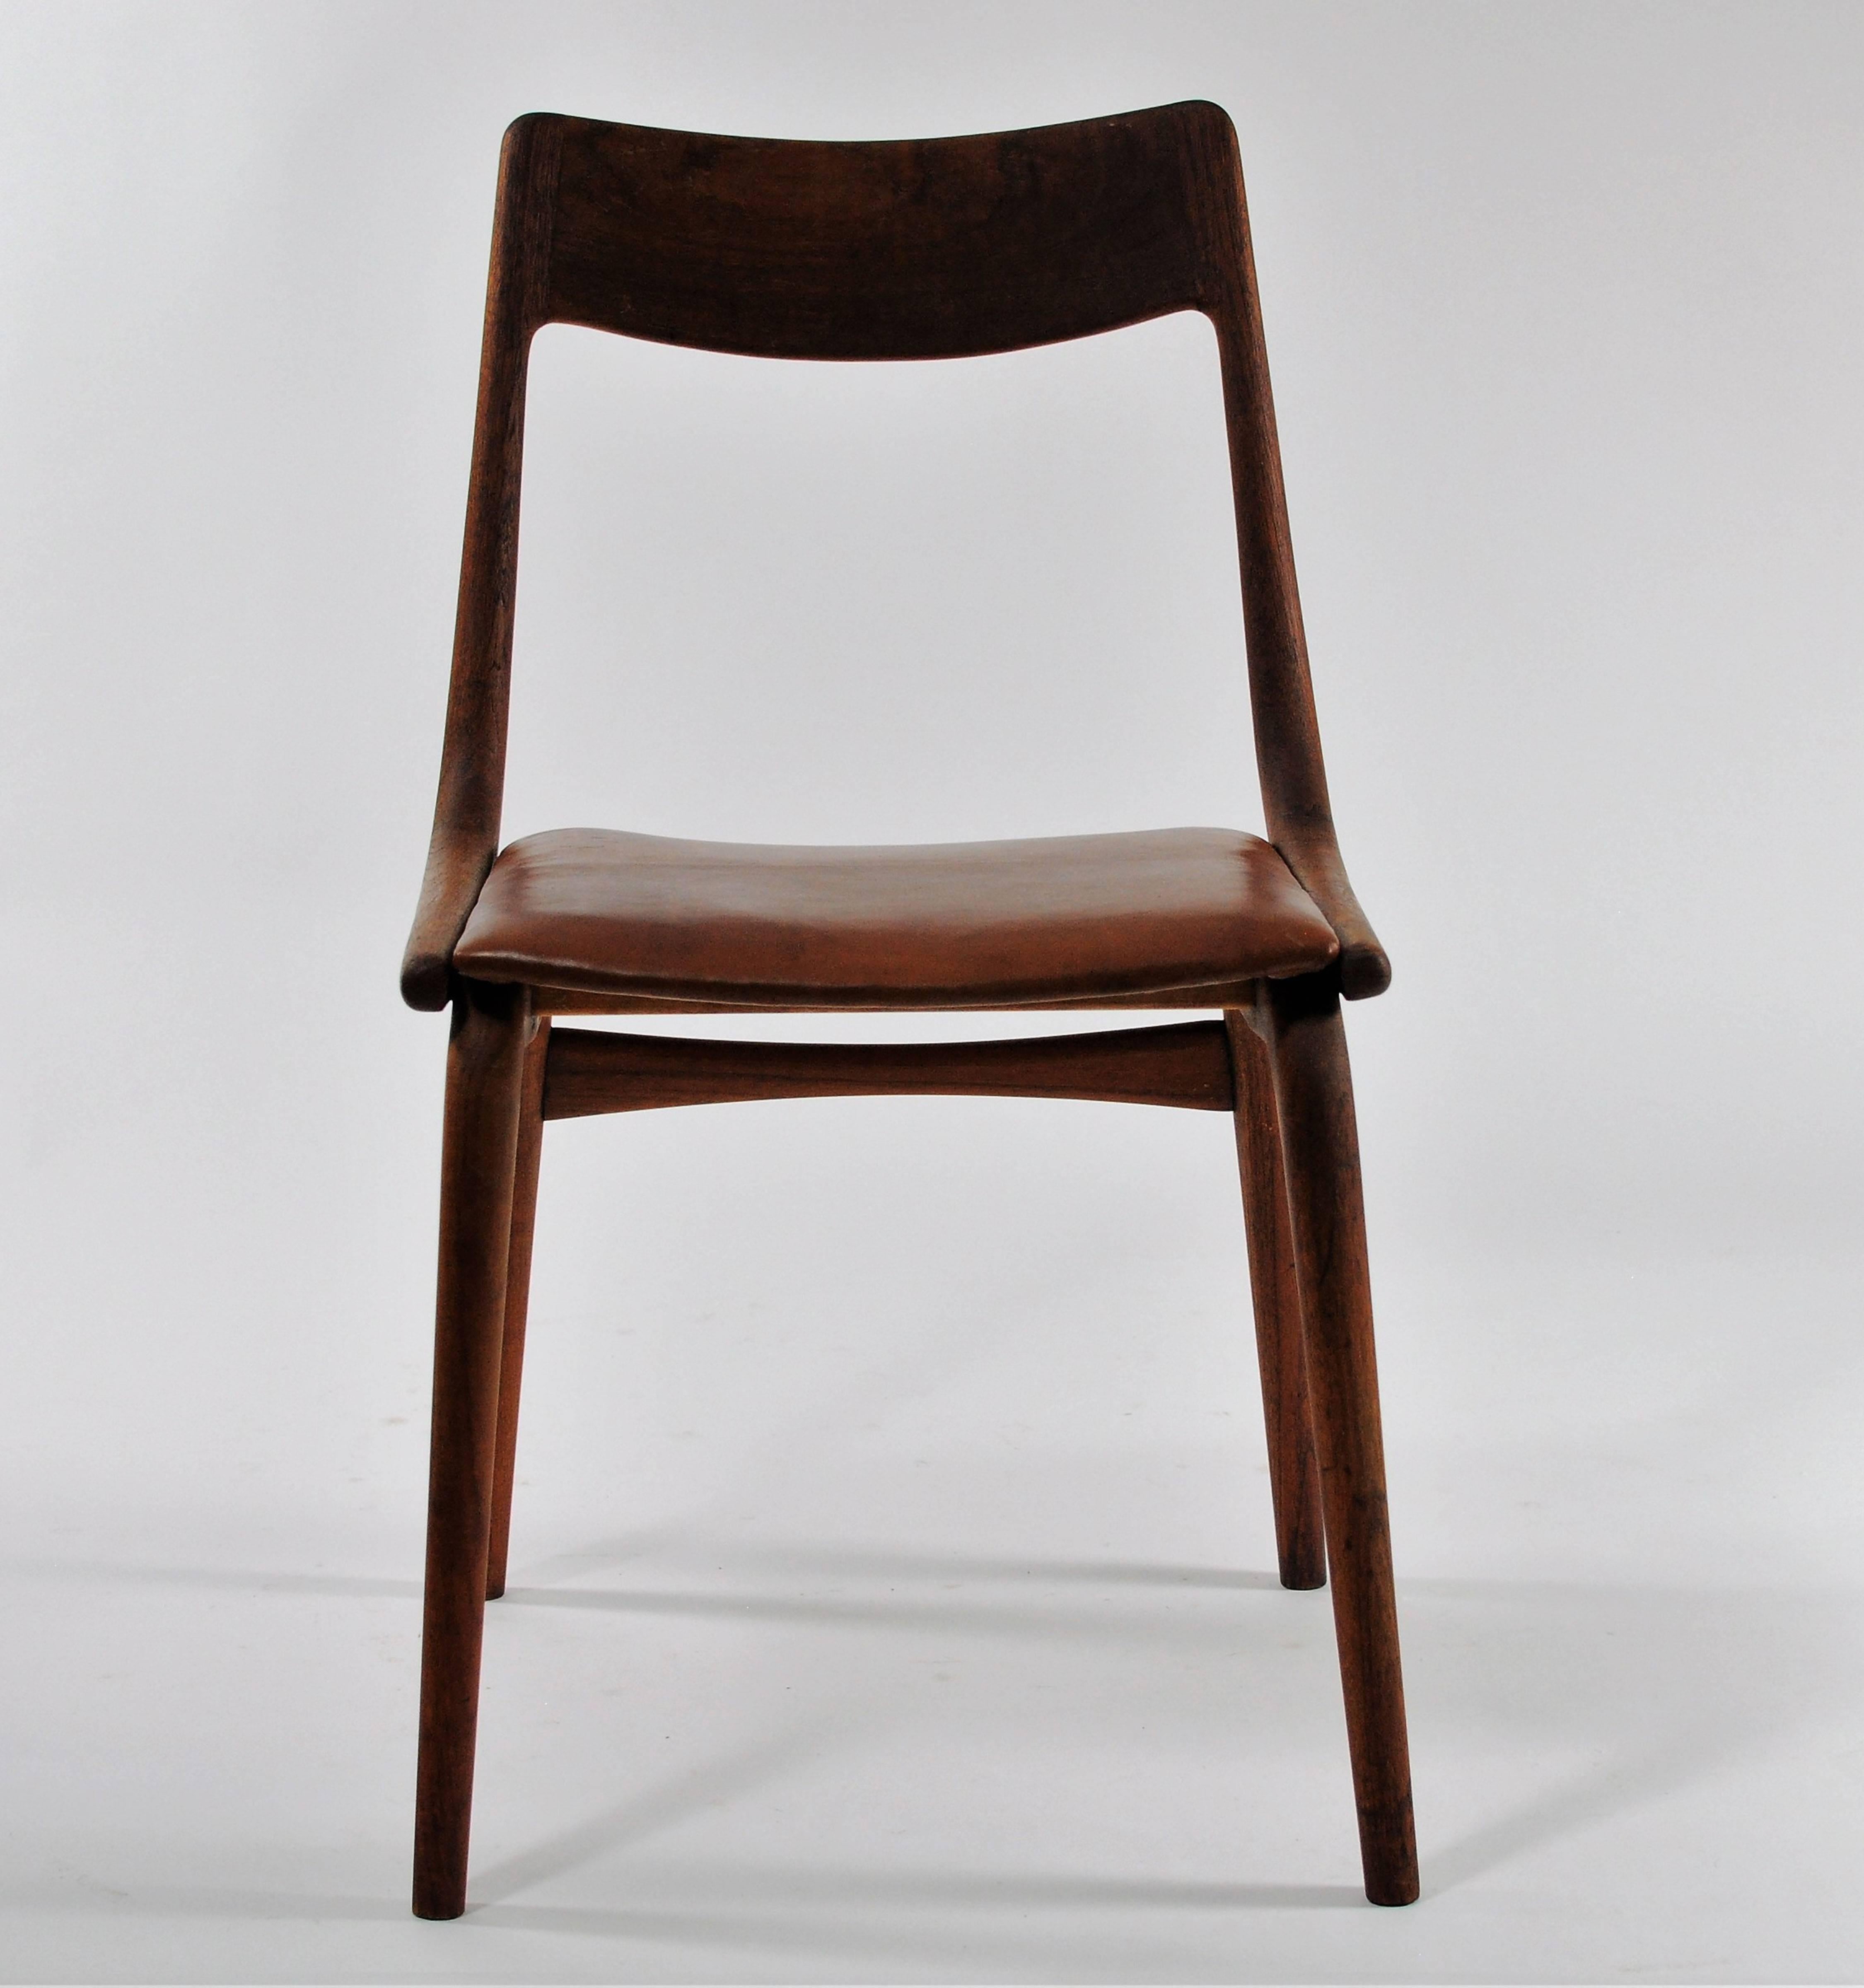 Set of eight 1950s Danish boomerang dining chairs in teak by Alfred Christensen for Slagelse Møbelfabrik.

The comfortable chairs feature a simple but elegant boomerang shaped frame in solid bended teak with a well shaped teak backrest and a very